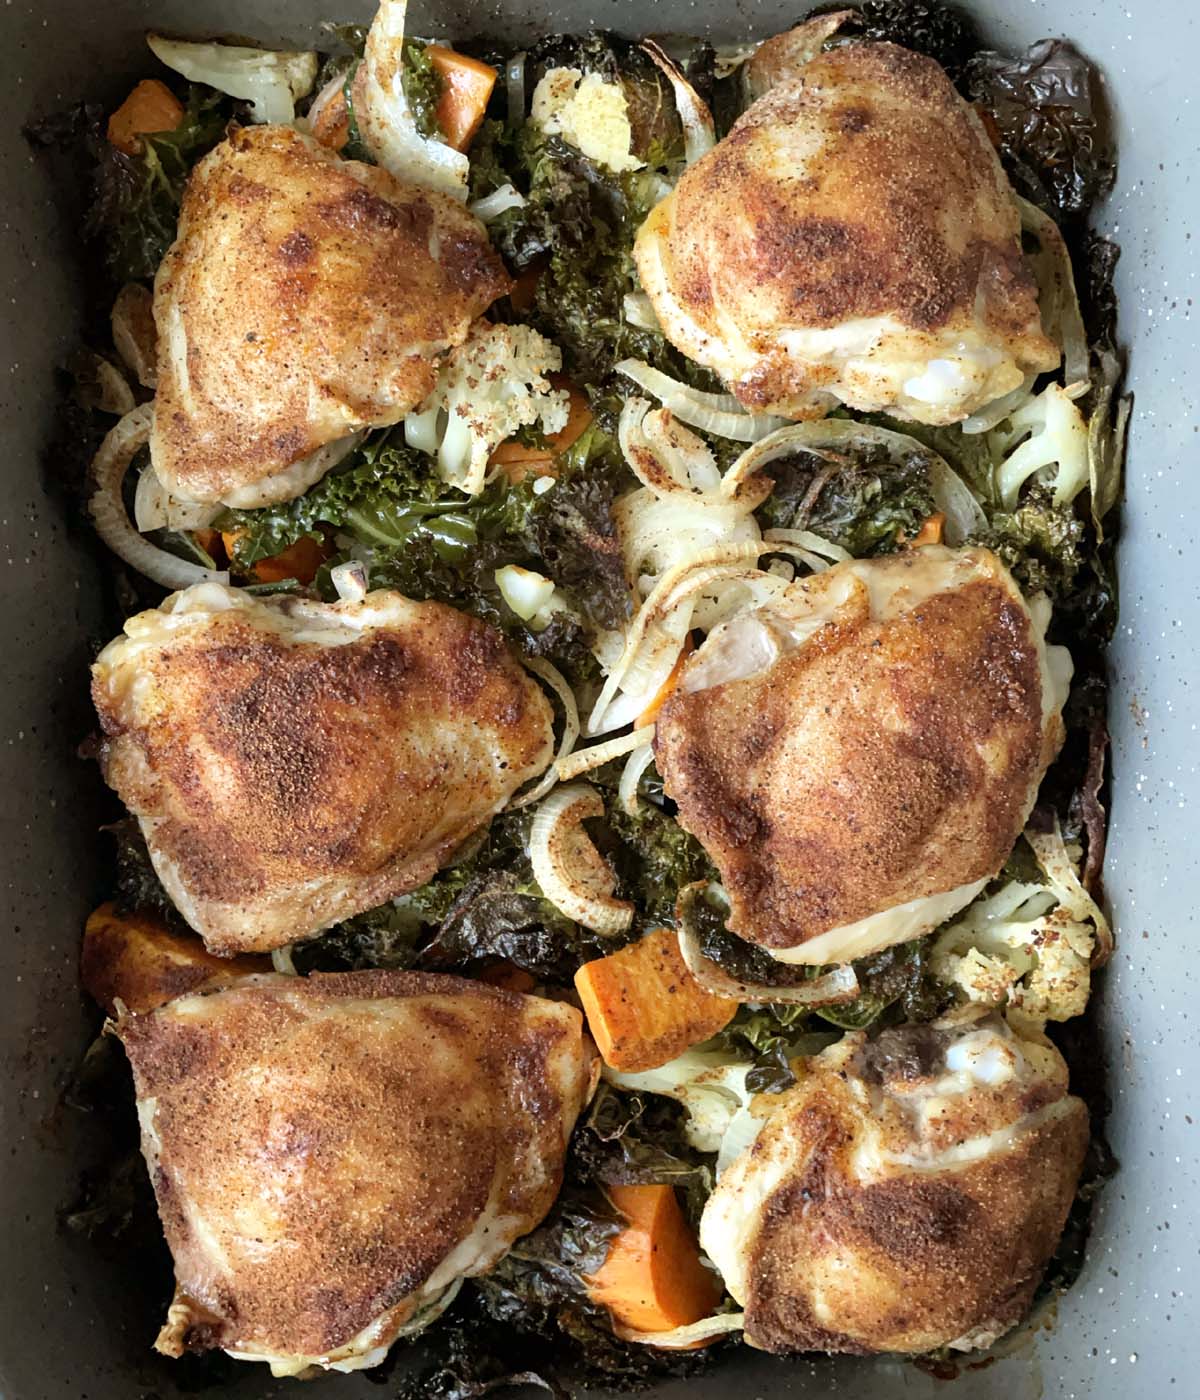 Six pieces of roasted chicken on a bed of vegetables in a rectangular roasting pan.